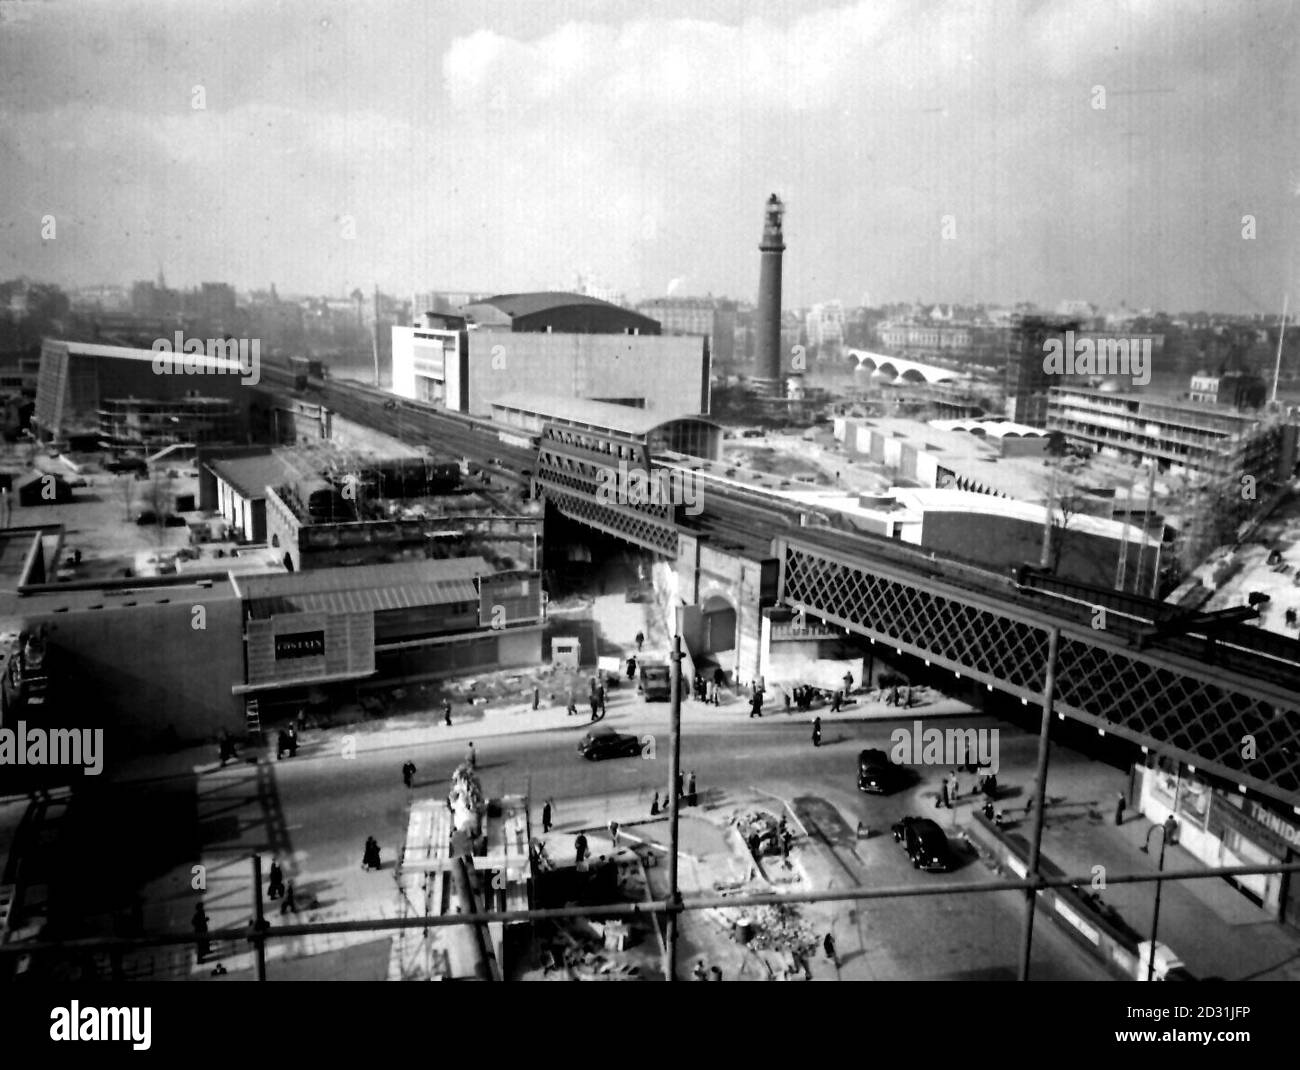 FESTIVAL OF BRITAIN 1951: A general view of the site of the exhibition from the roof of Waterloo Station, London. (l-r) Aeronautical Hall, the Royal Festival Hall, the Shot Tower, Waterloo Bridge. Stock Photo